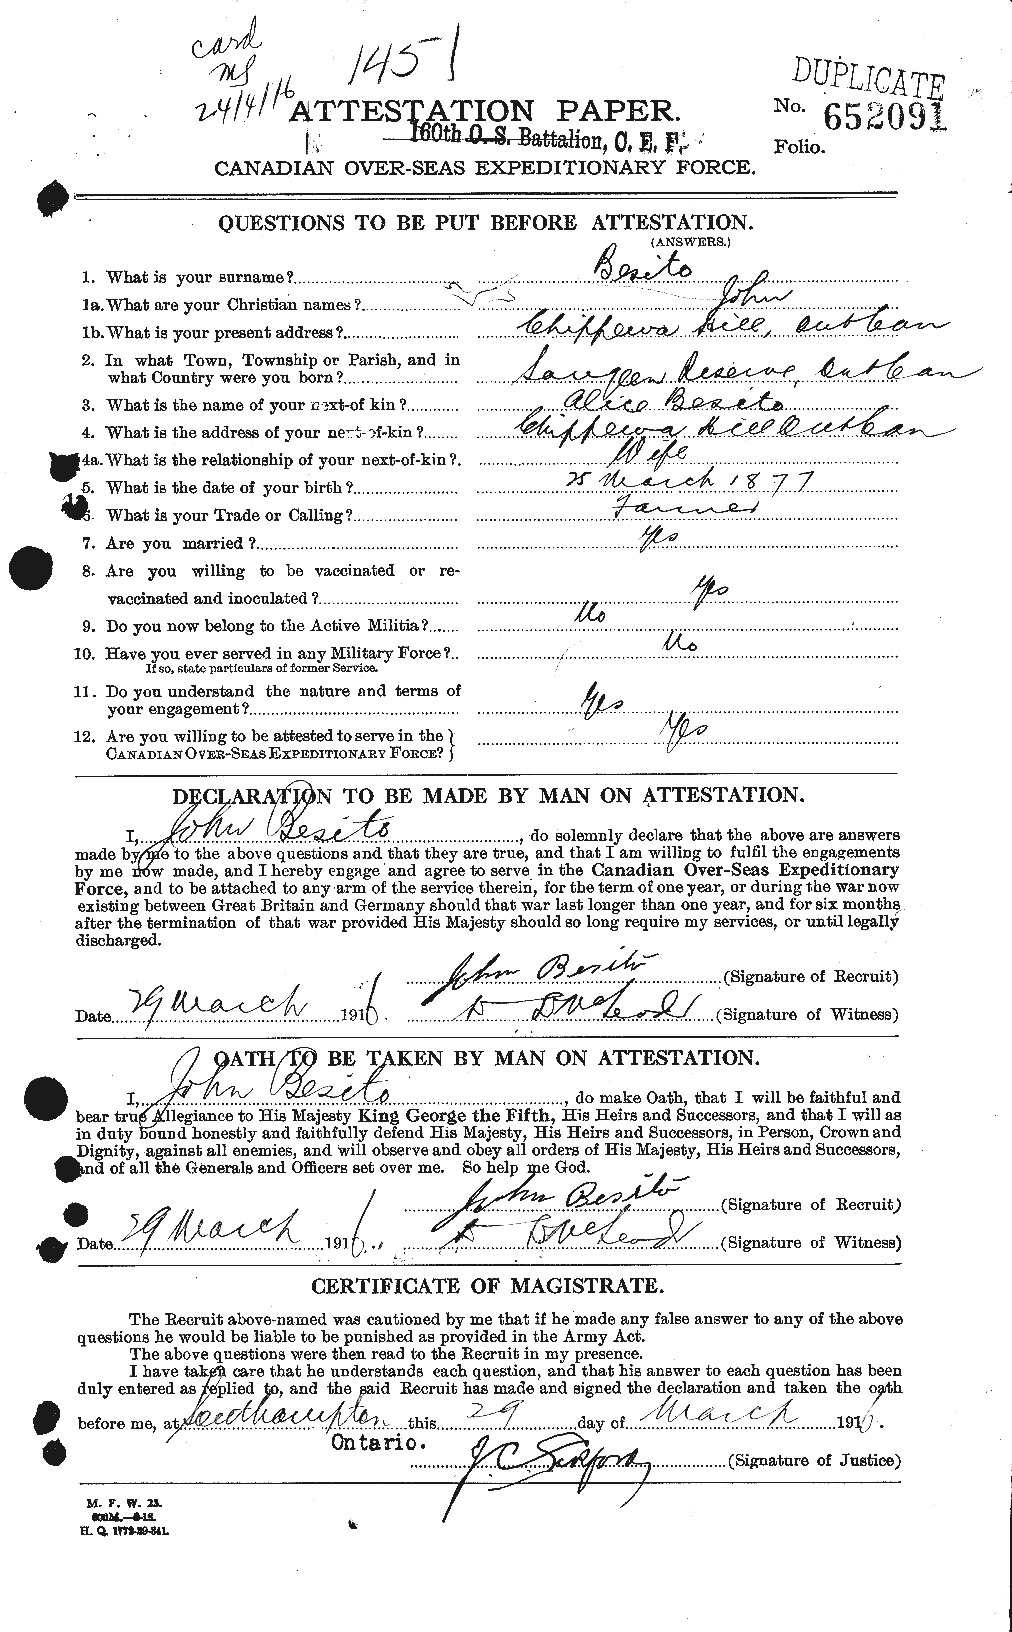 Personnel Records of the First World War - CEF 240114a